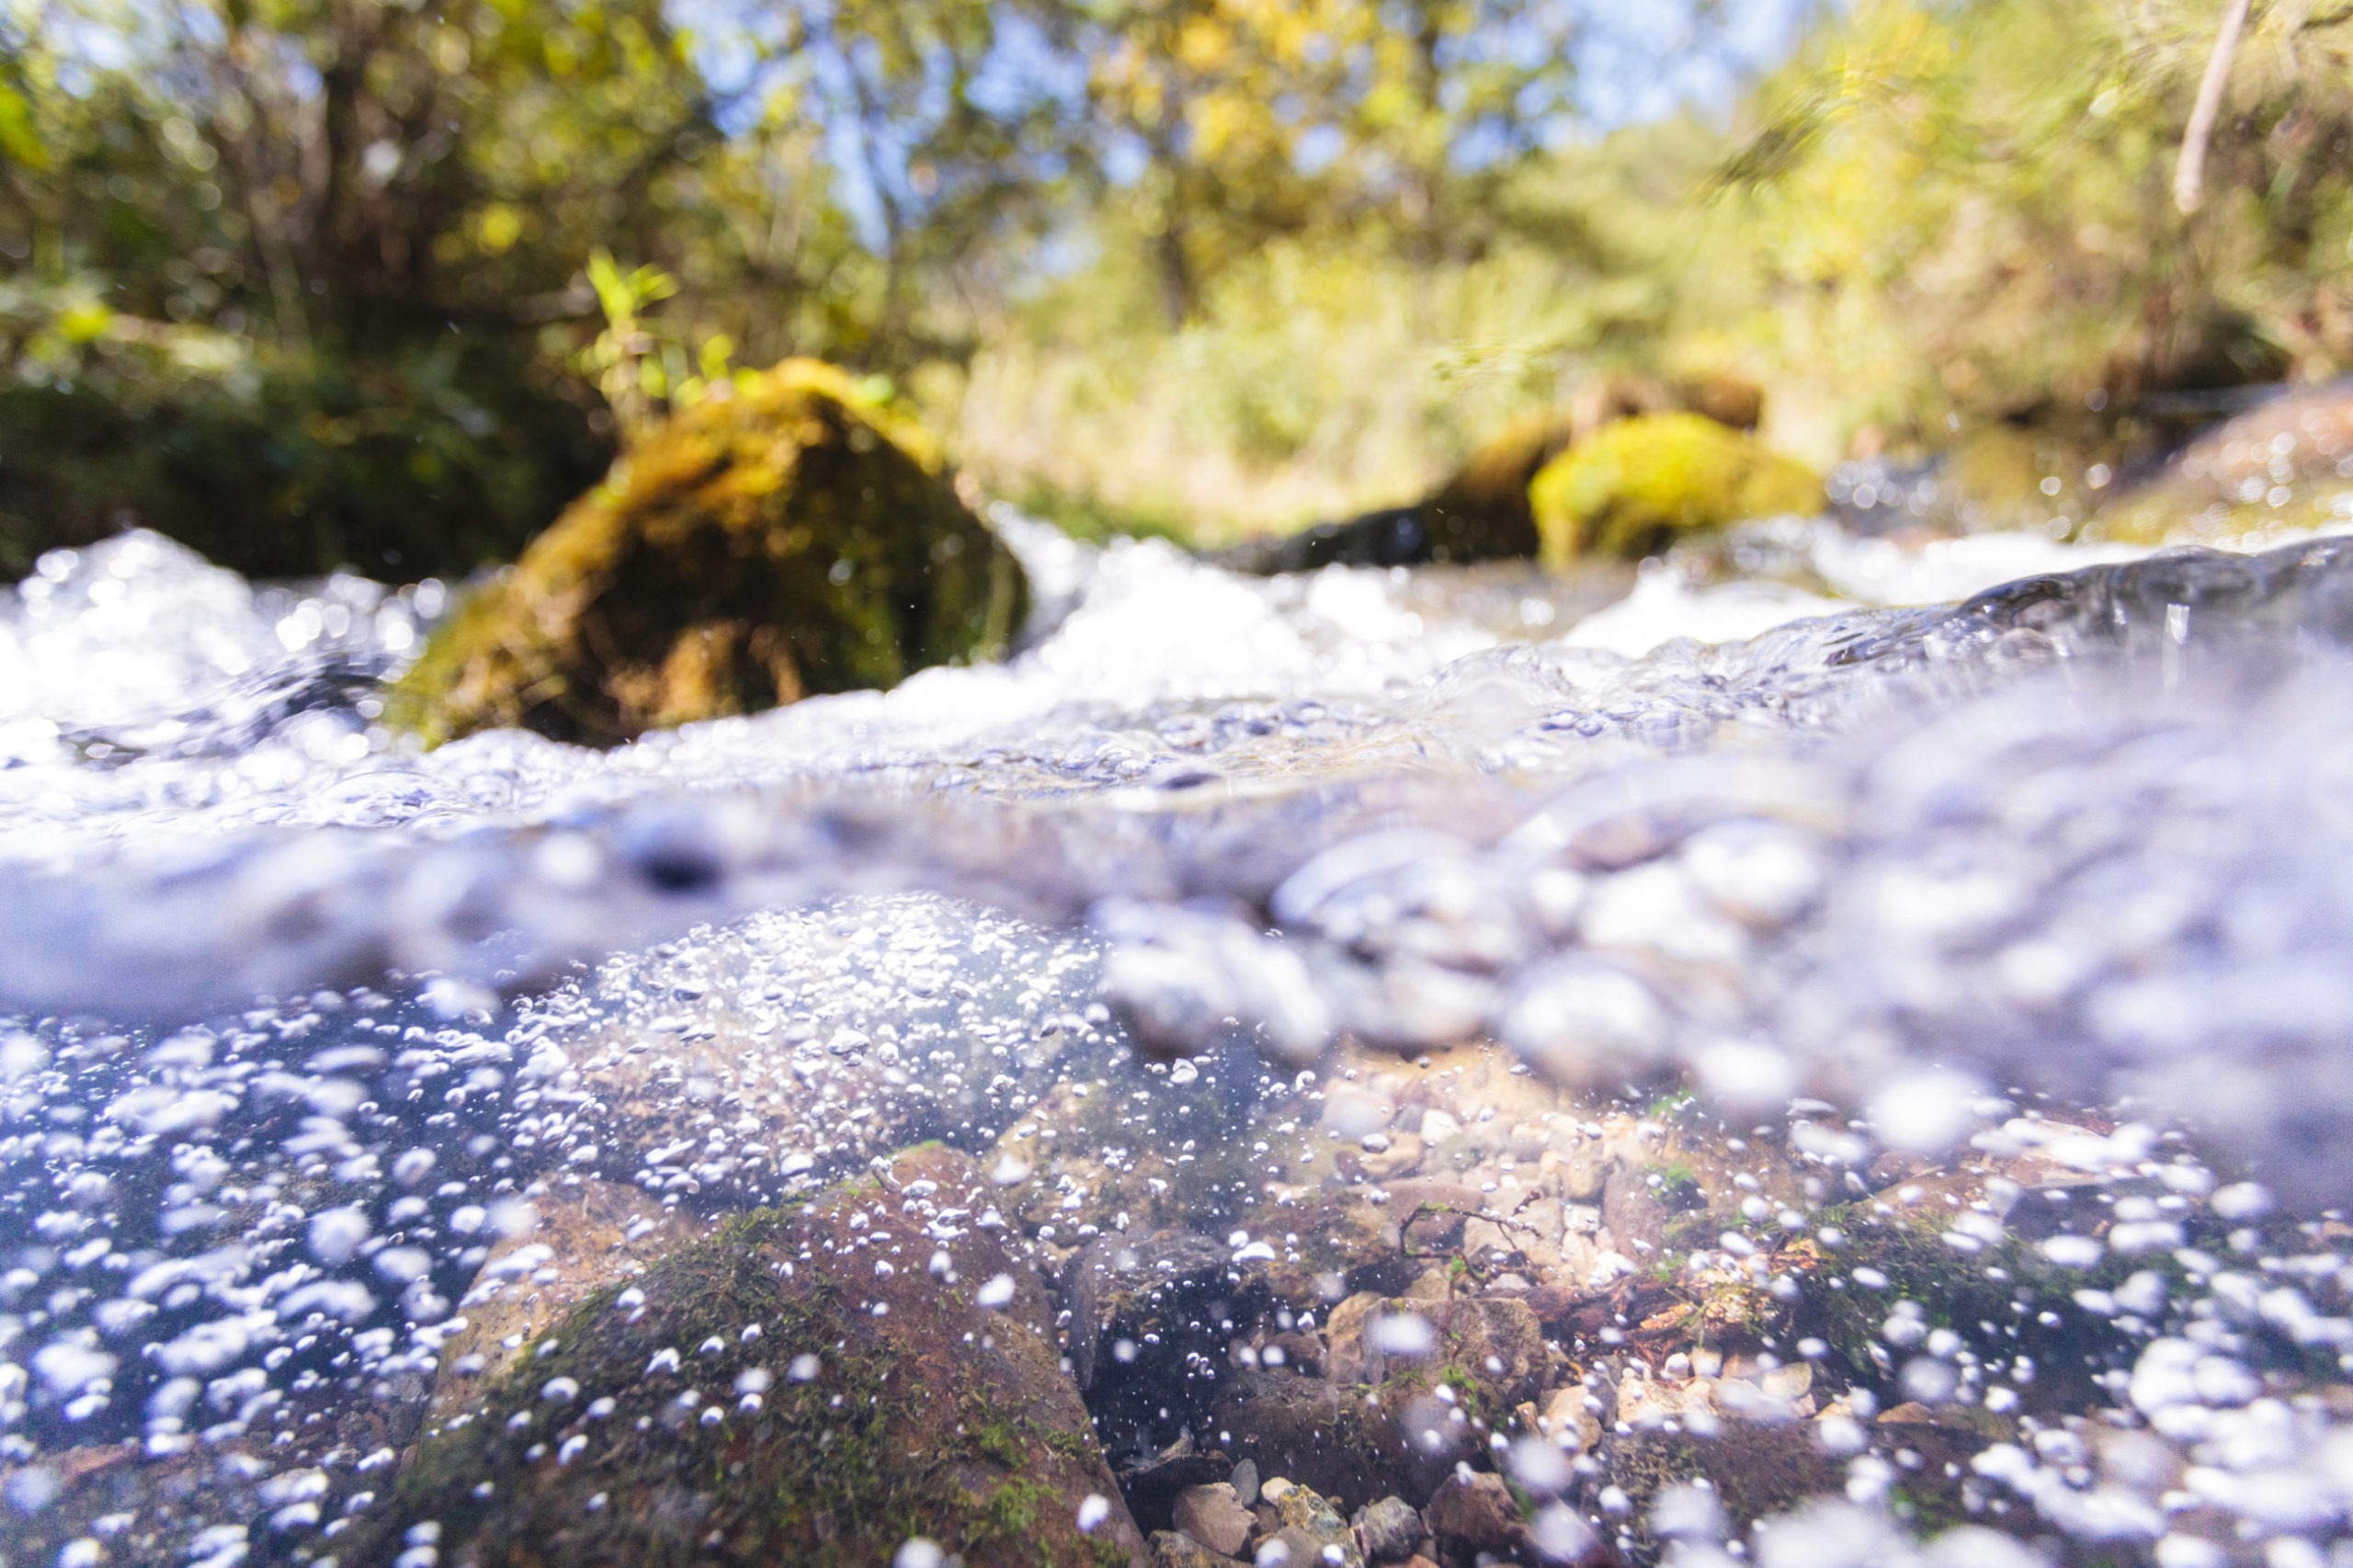 Clear water bubbles up half the image frame and river rocks can be seen behind the bubbles with trees and blue sky in the background.